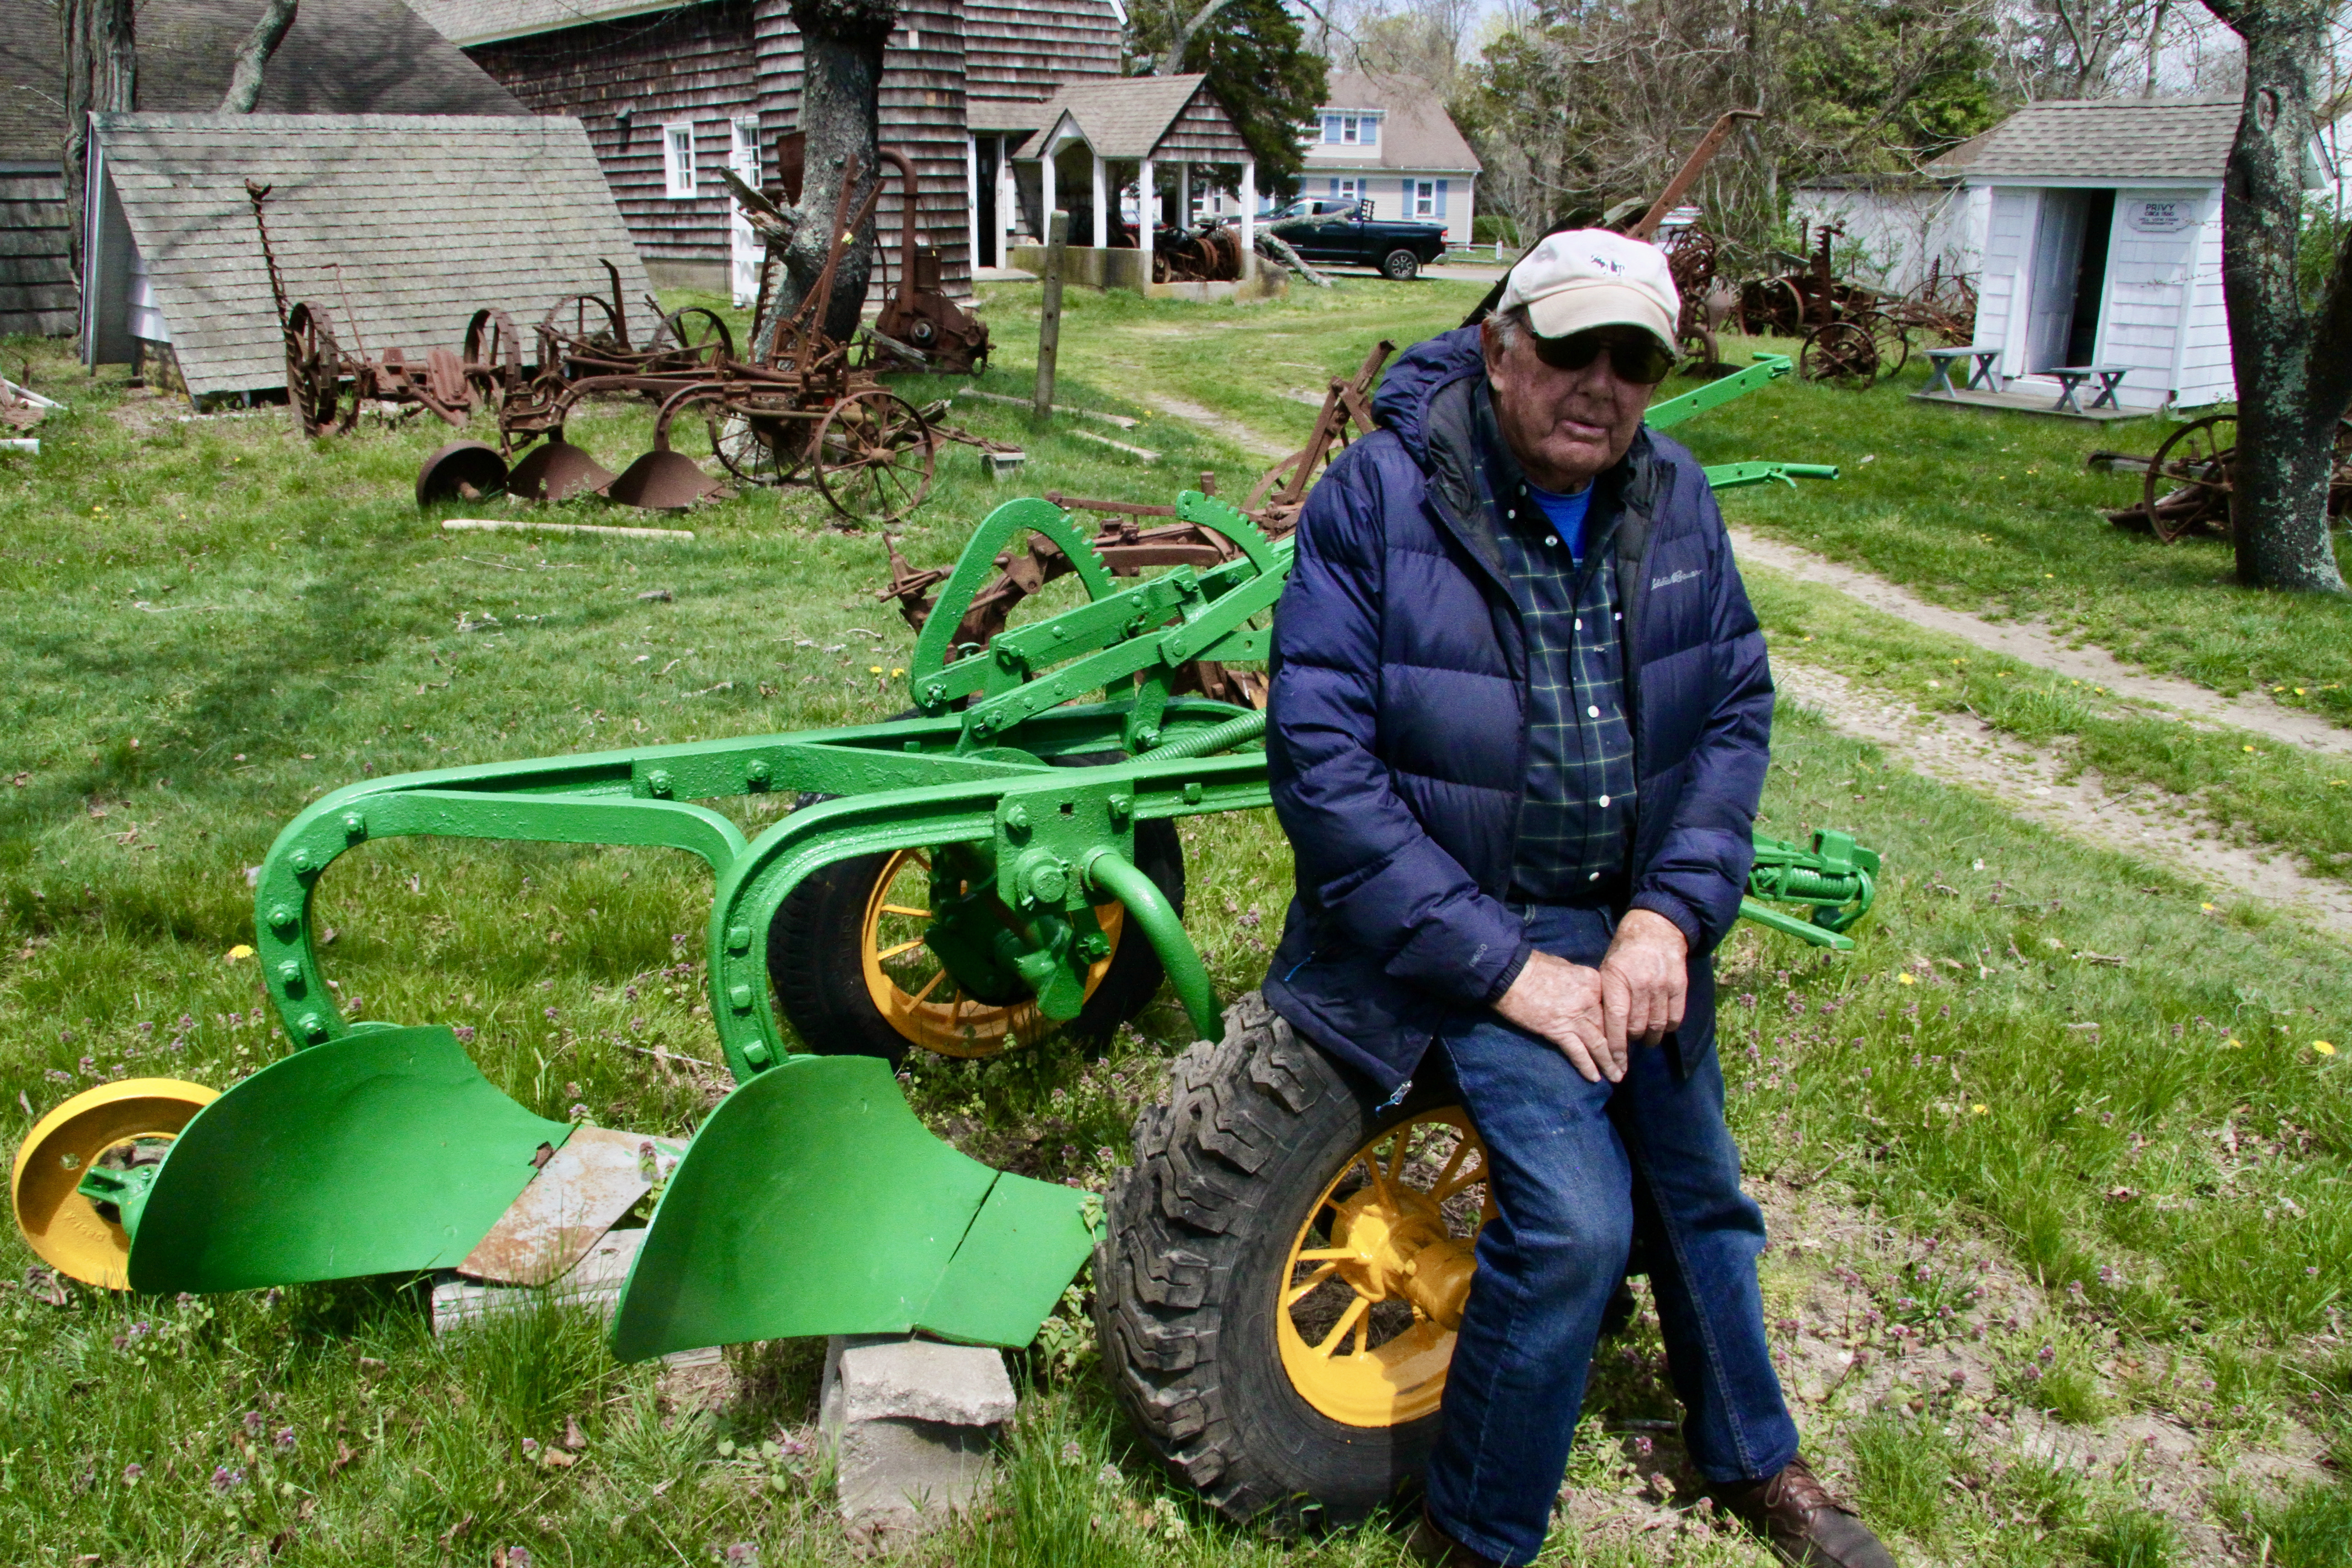 Ron Bush had been collecting Long Island farming tools, equipment and memorabelia for 60 years.